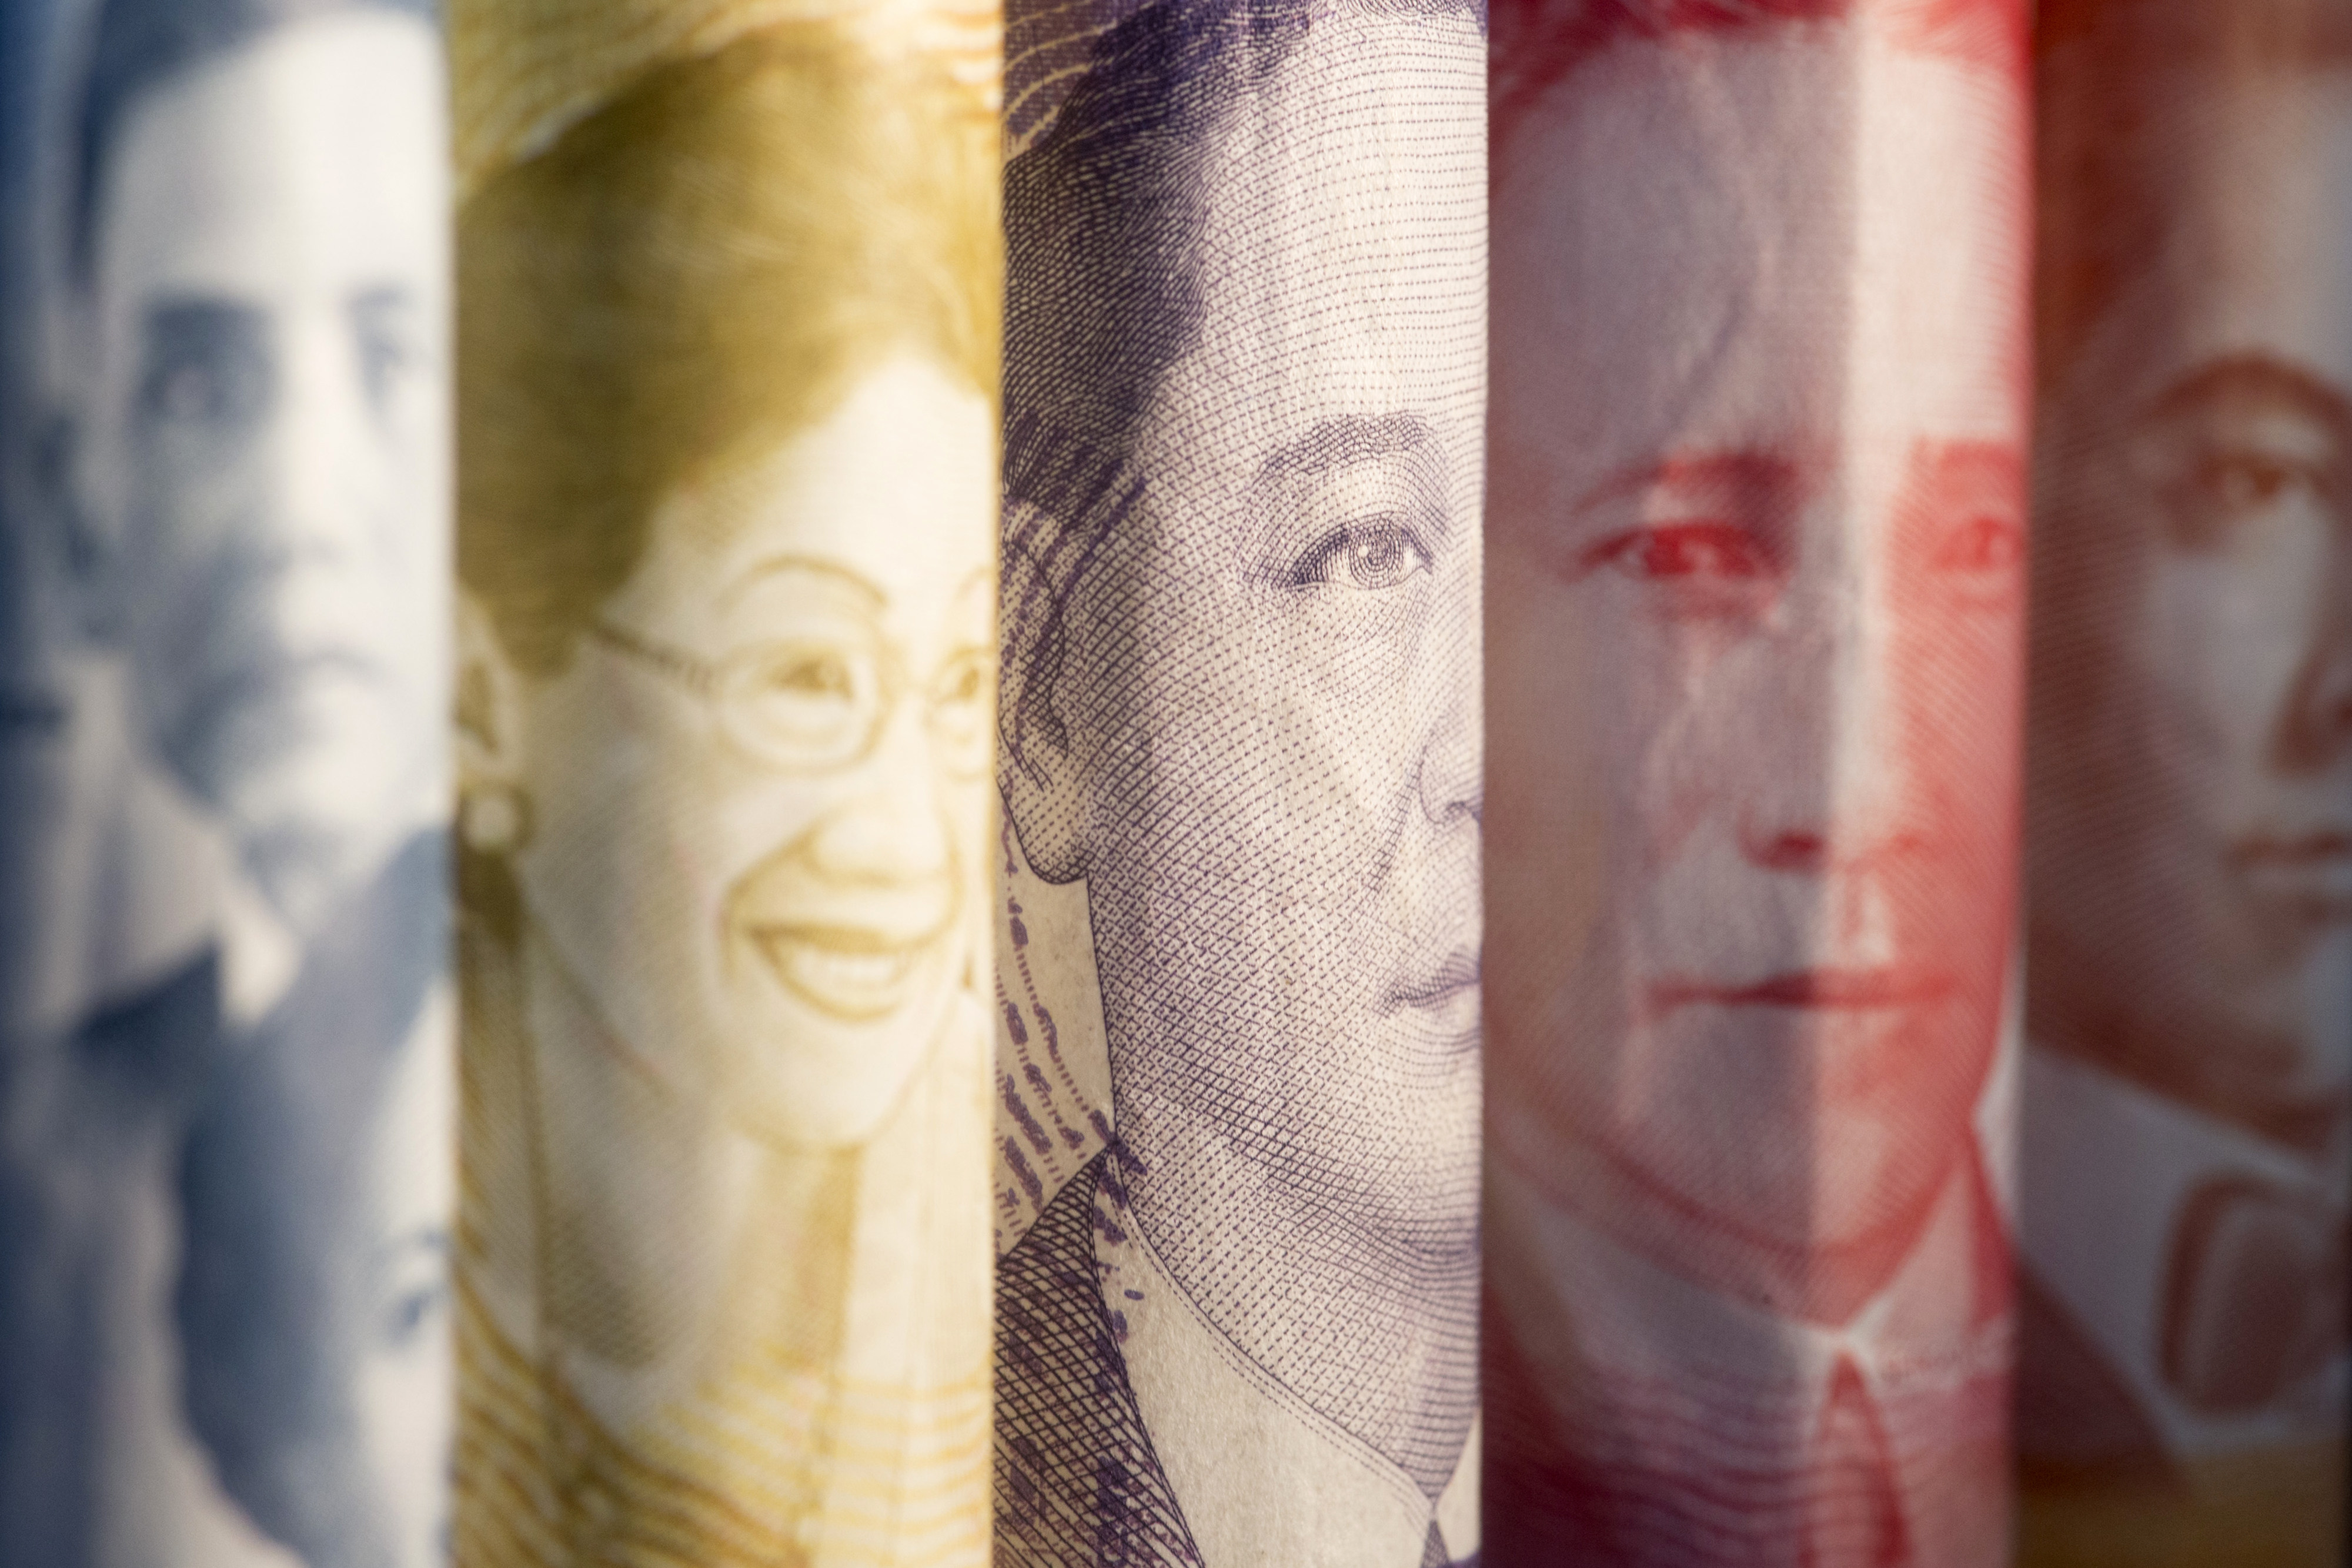 The portraits of former Philippines’ Acting President José Abad Santos, from left, and former Philippines’ Presidents Corazon Aquino, Manuel A. Roxas, Sergio Osmena and Manuel L. Quezon are displayed on 1000, 500, 100, 50 and 20 peso banknotes respectively in an arranged photograph in Bangkok, Thailand. Photo: Bloomberg